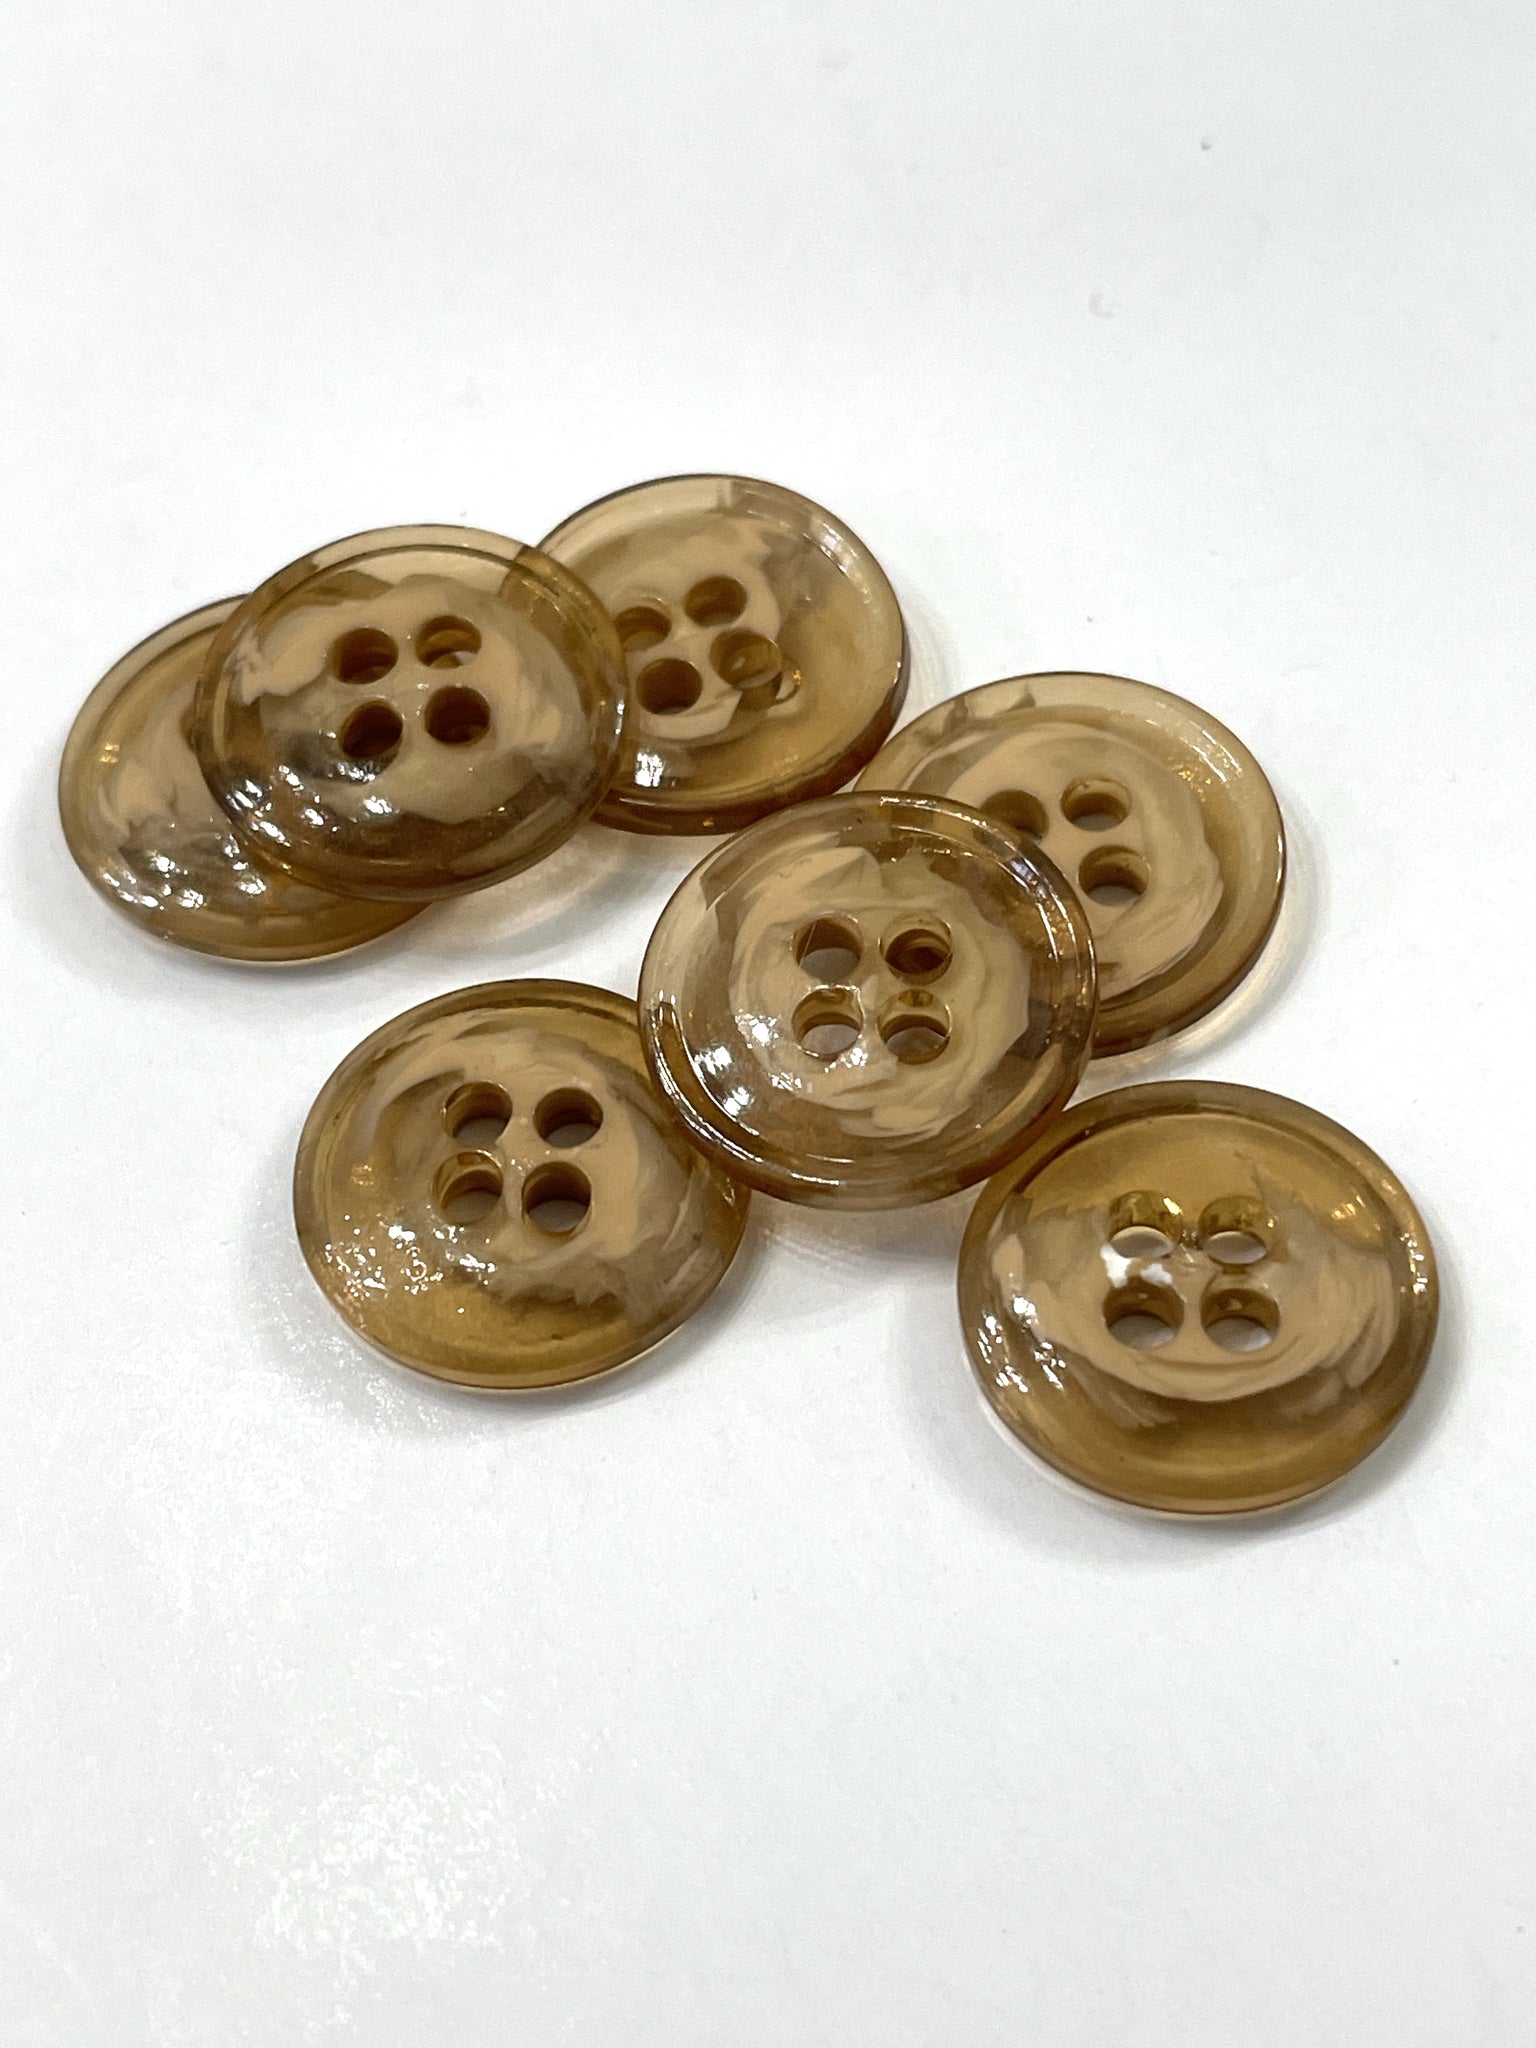 Buttons 4 Hole Plastic Set of 7 - Marbled Clear and Opaque Beige